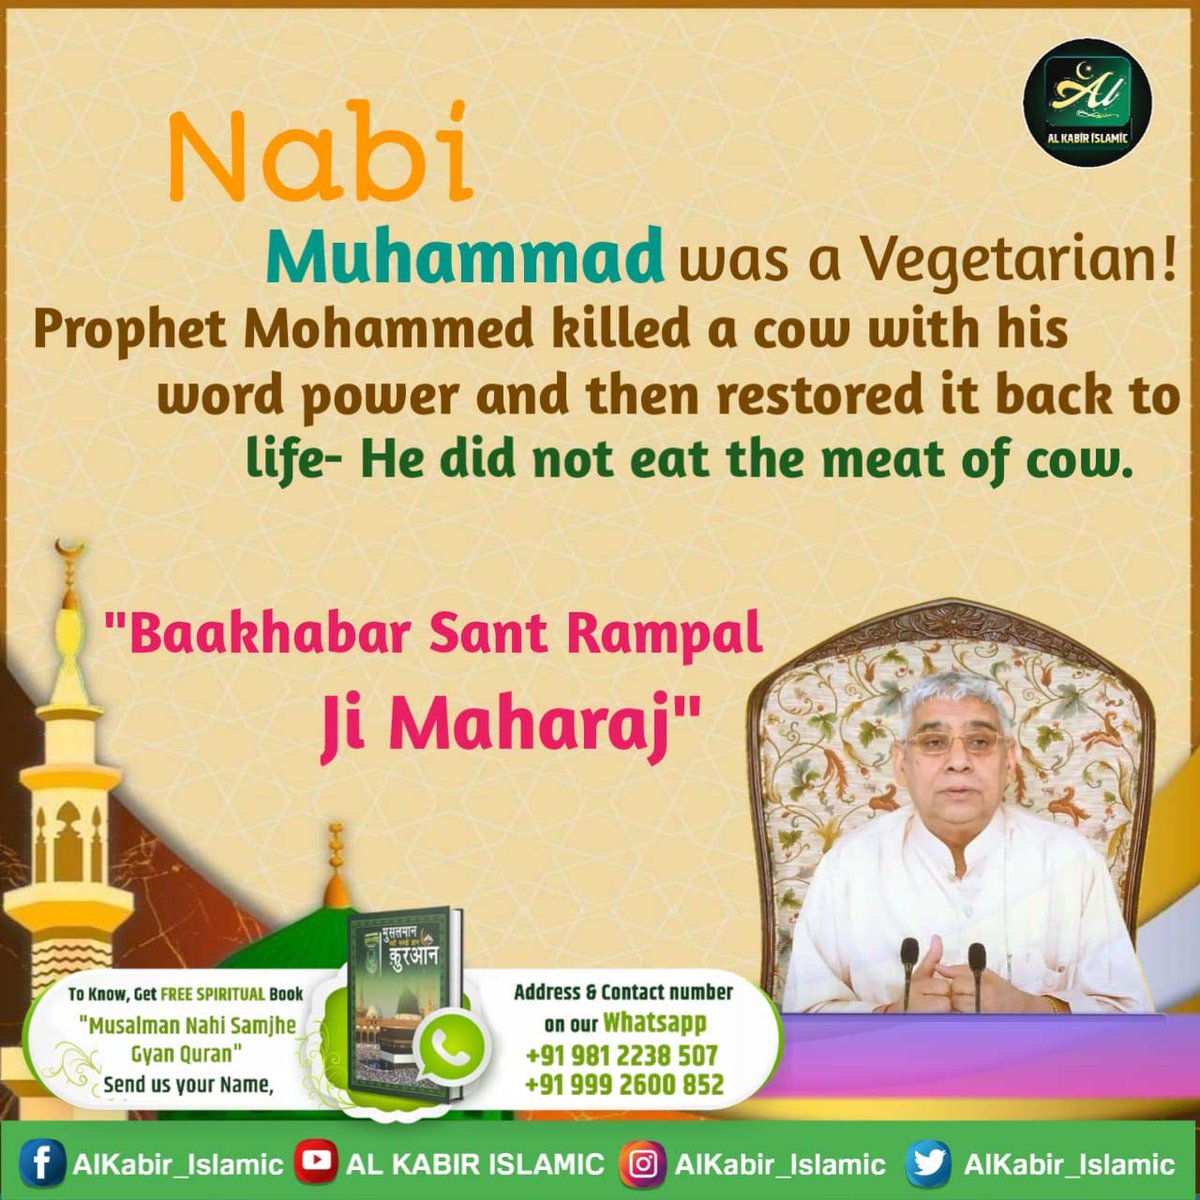 #GodMorningFriday
Nabi
Muhammad was a Vegetarian!
Prophet Muhammad killed a cow with his word power and then restored it back to life. He did not eat the meat of cow.
Must read the Holy book 'Muslman Nahi Samjhe Gyan Quran'
Baakhabar Sant Rampal Ji
#FridayMotivation